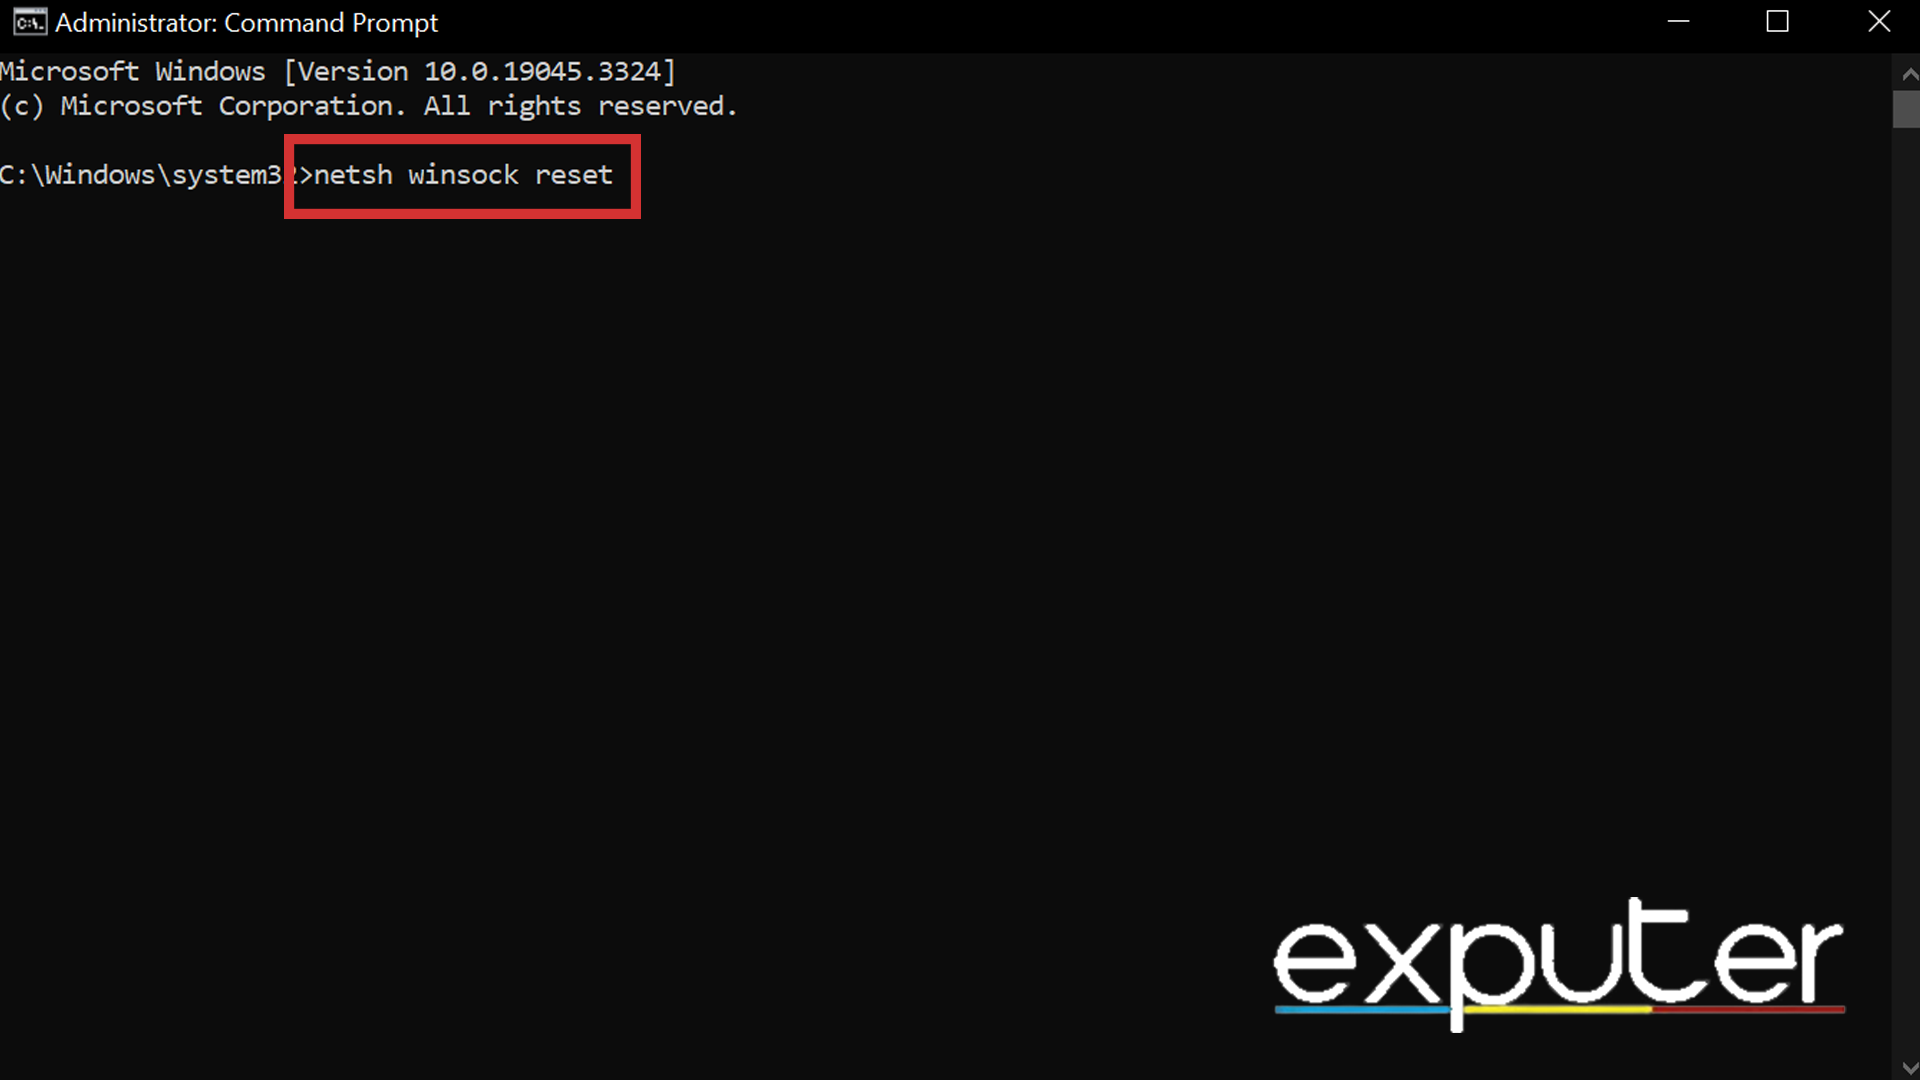 Running the network connection reset command in cmd. (image captured by eXputer)